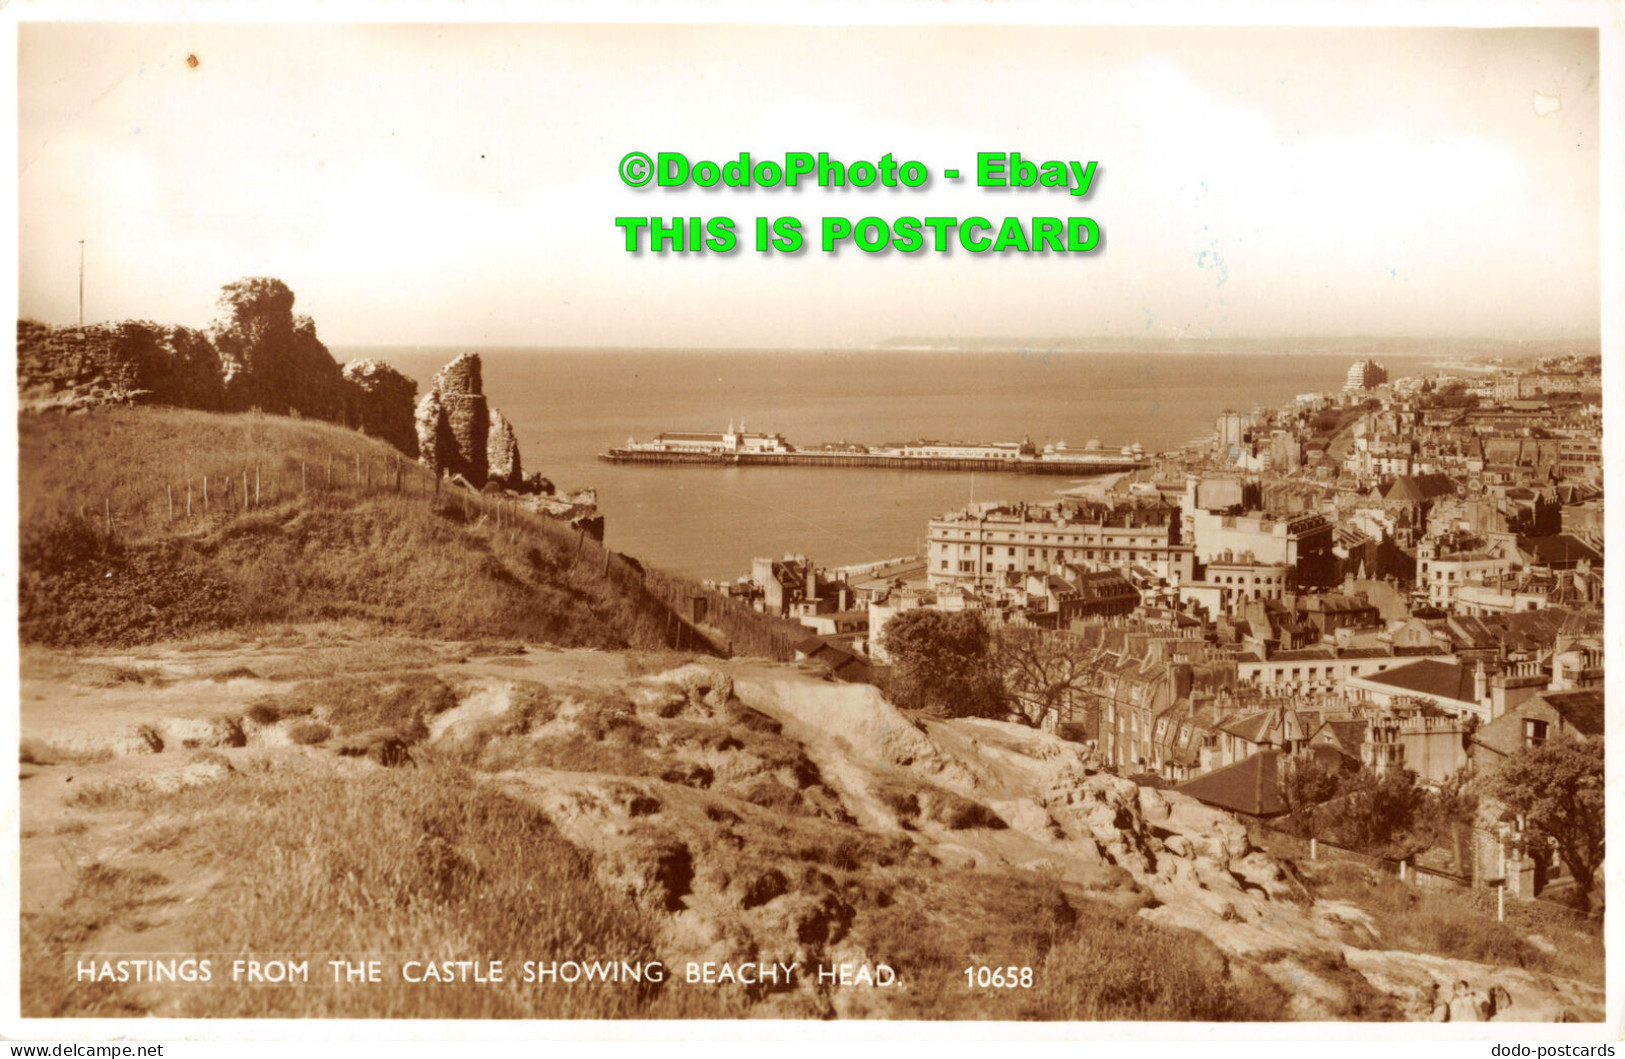 R356794 Hastings From The Castle Showing Beachy Head. 10658. Norman. Shoesmith A - World